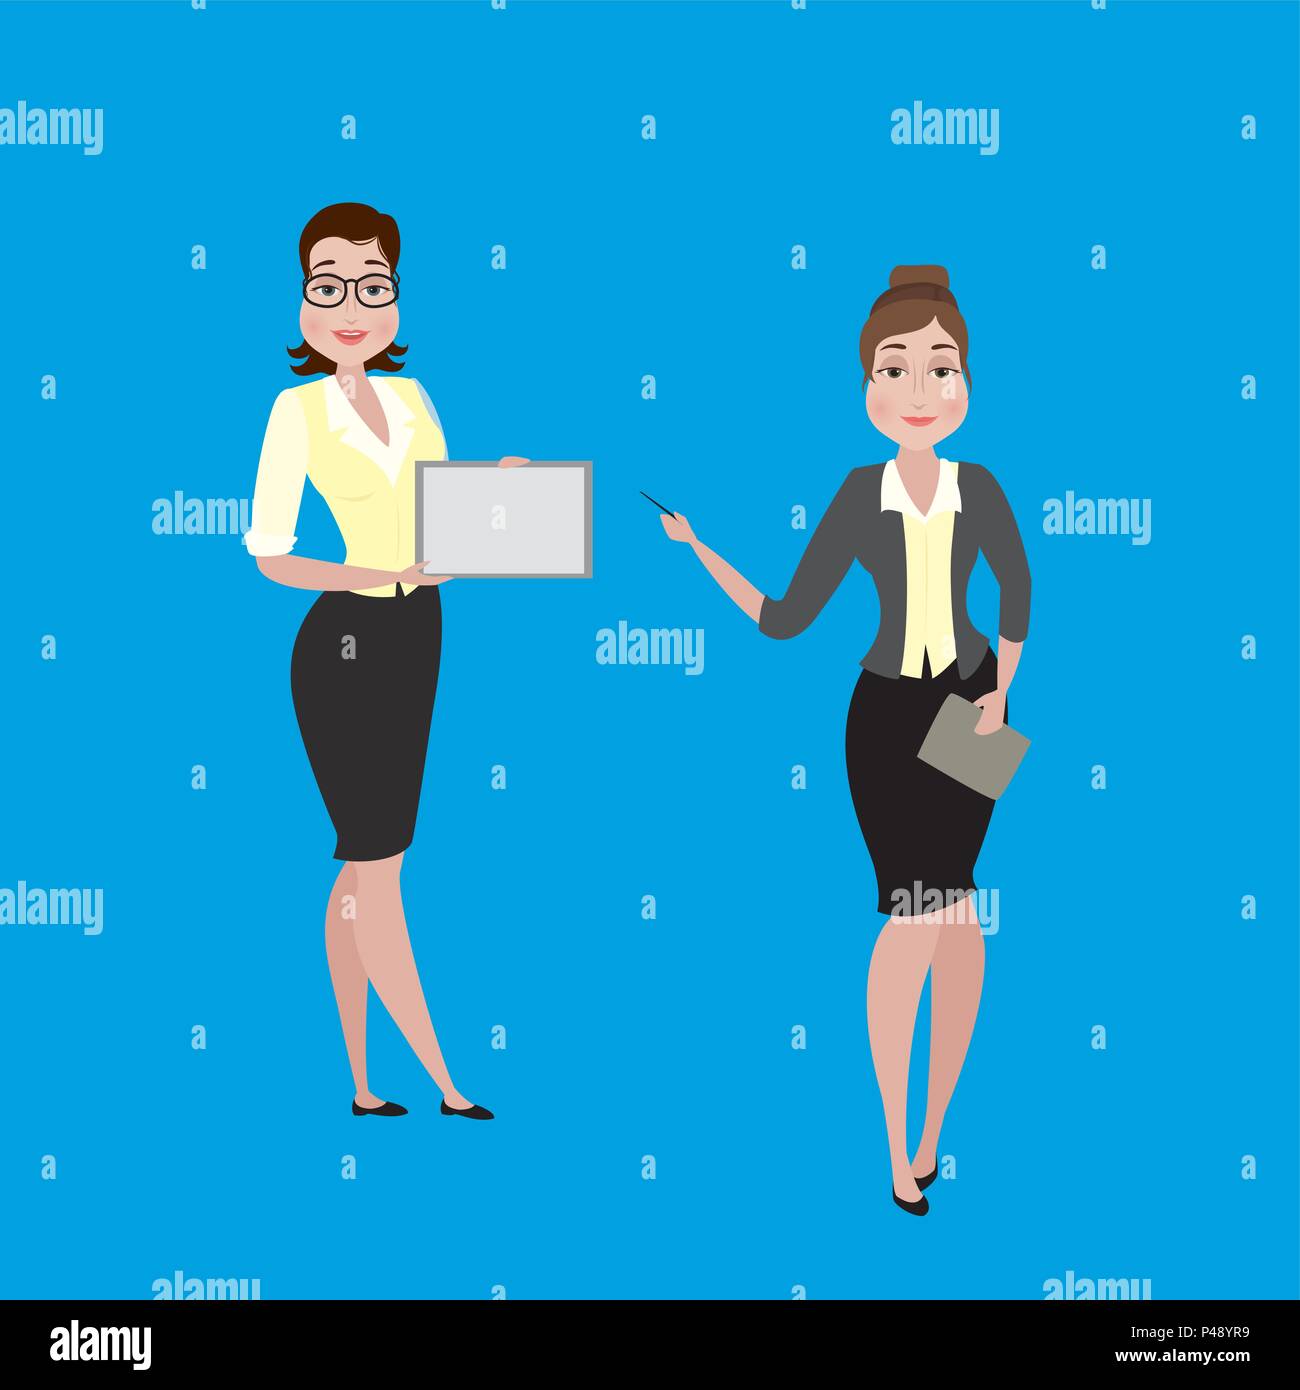 Two Businesswoman or office worker ,different character, isolated on white background, stock vector illustration. Stock Vector